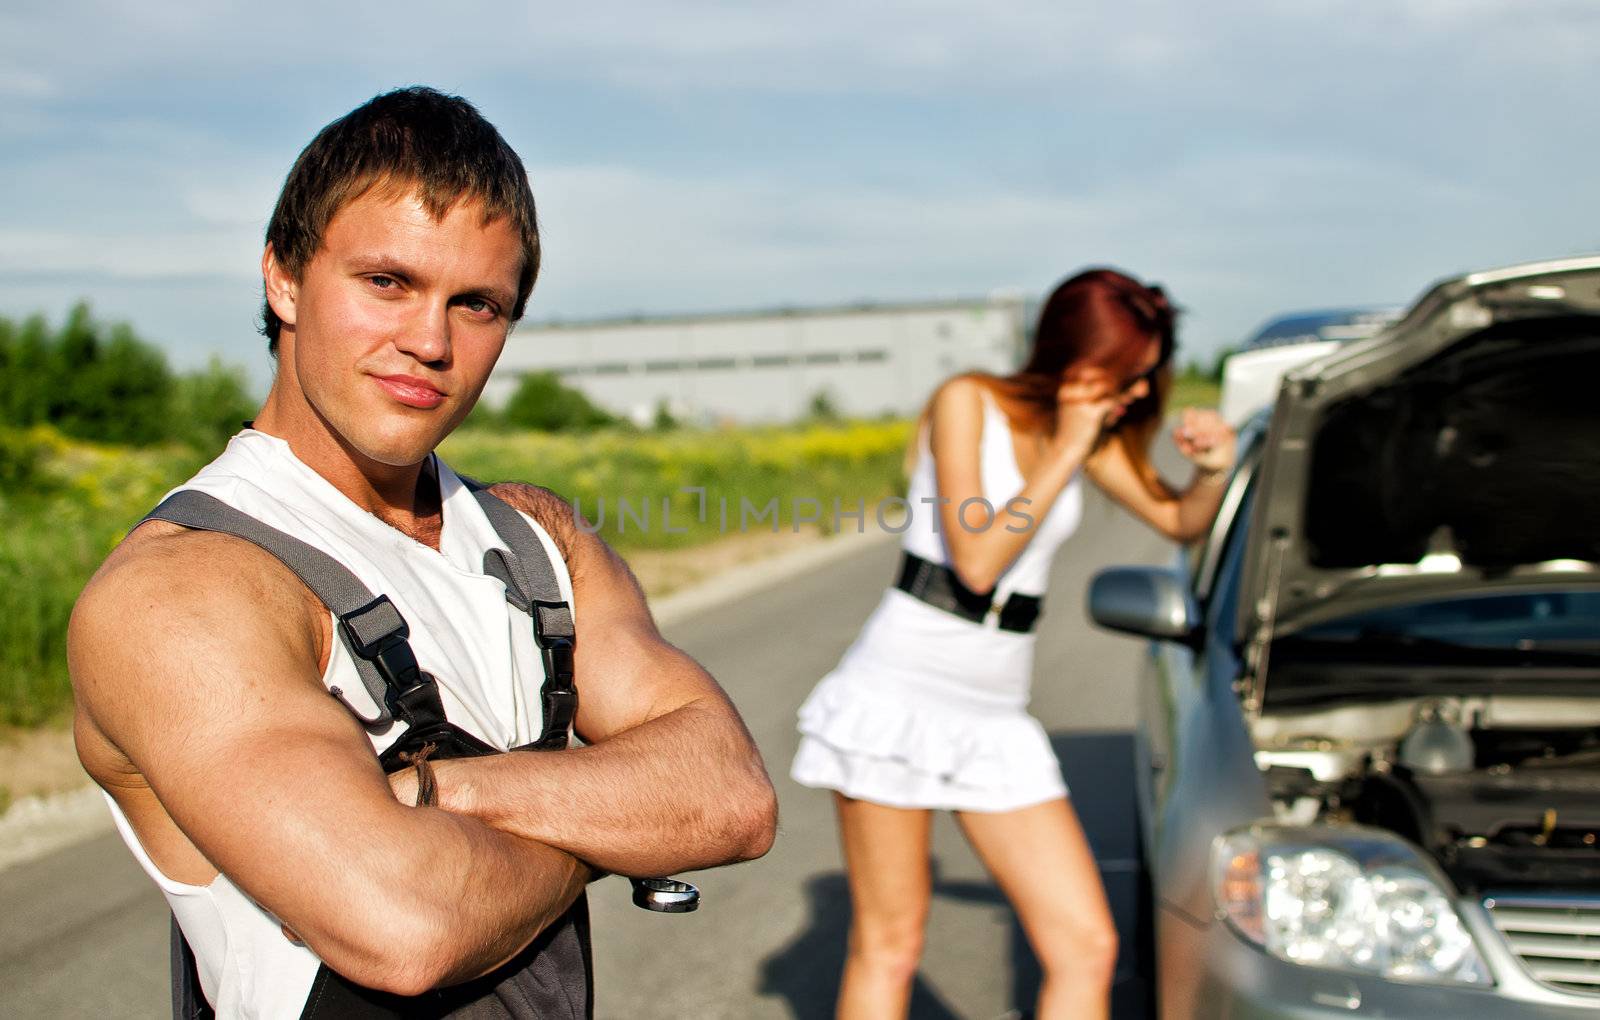 Portrait of a hadsome mechanic with a girl near broken car on a background